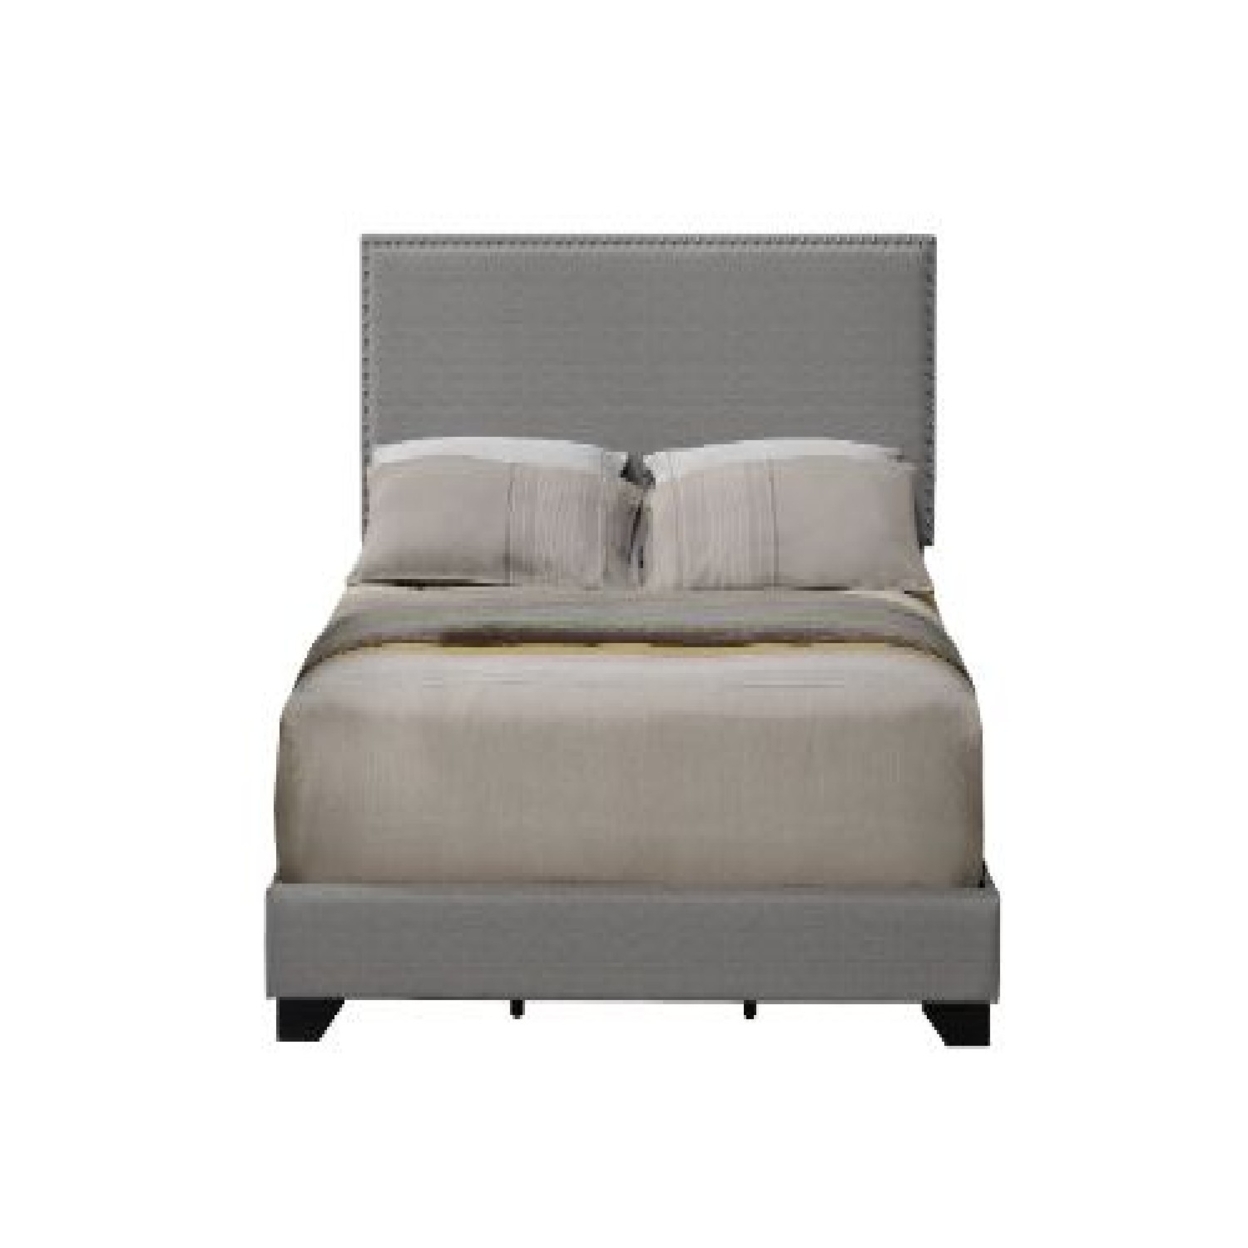 Queen Size Bed With Fabric Upholstery And Nailhead Accent, Gray- Saltoro Sherpi